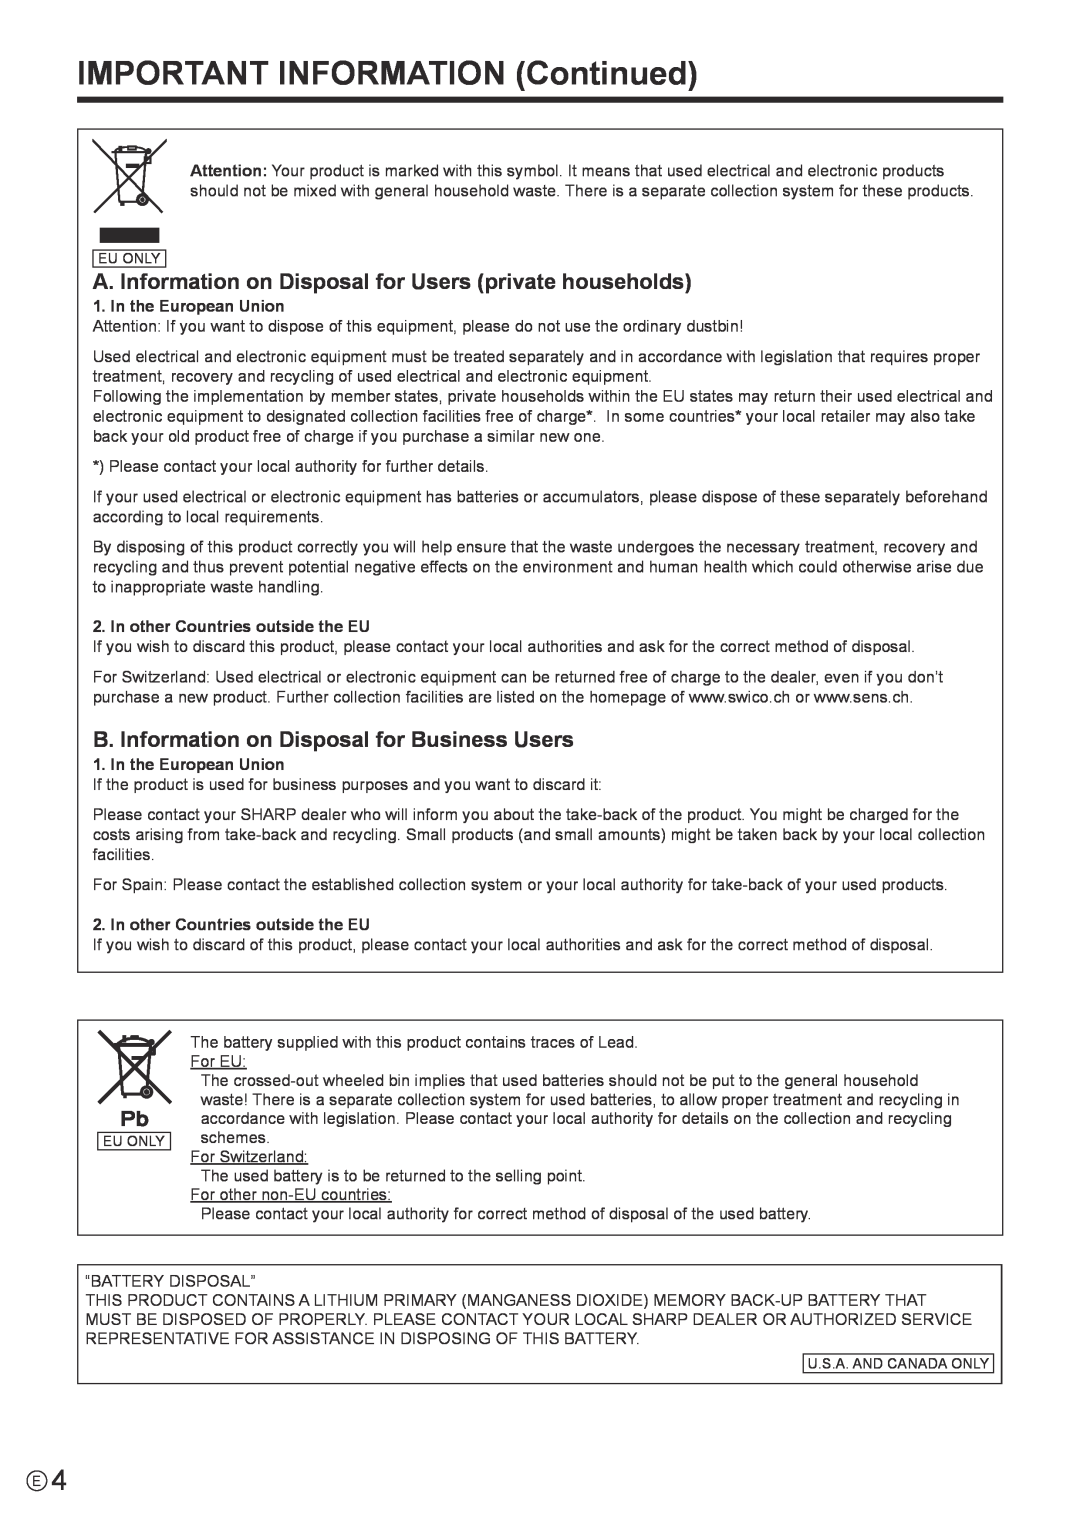 Sharp PN-E602 operation manual IMPORTANT INFORMATION Continued, A. Information on Disposal for Users private households 